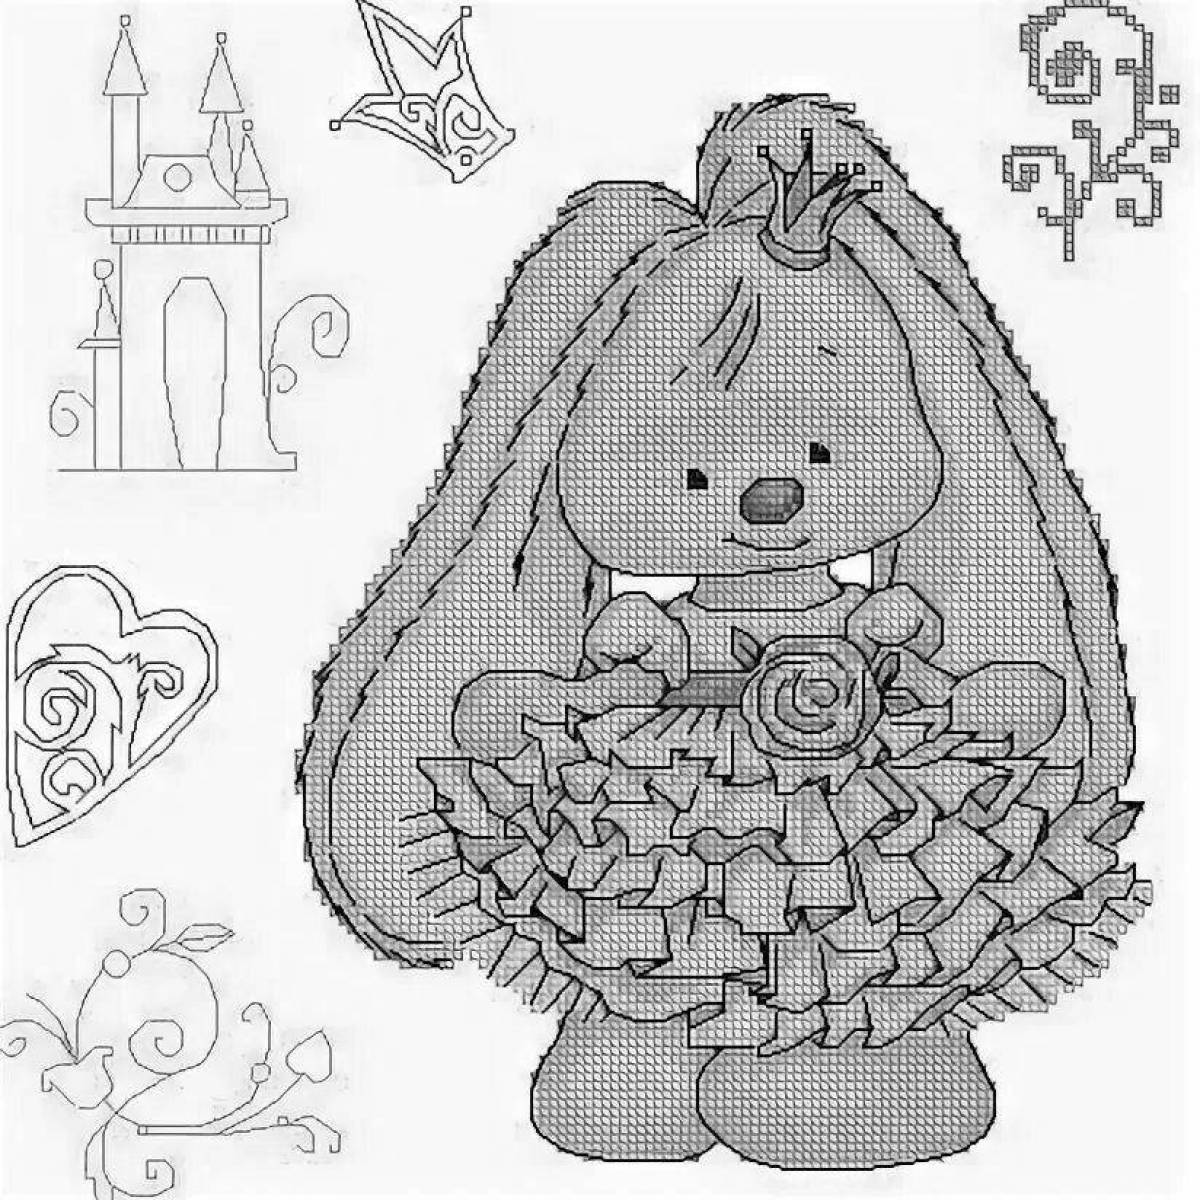 Playtime mi bunny coloring page